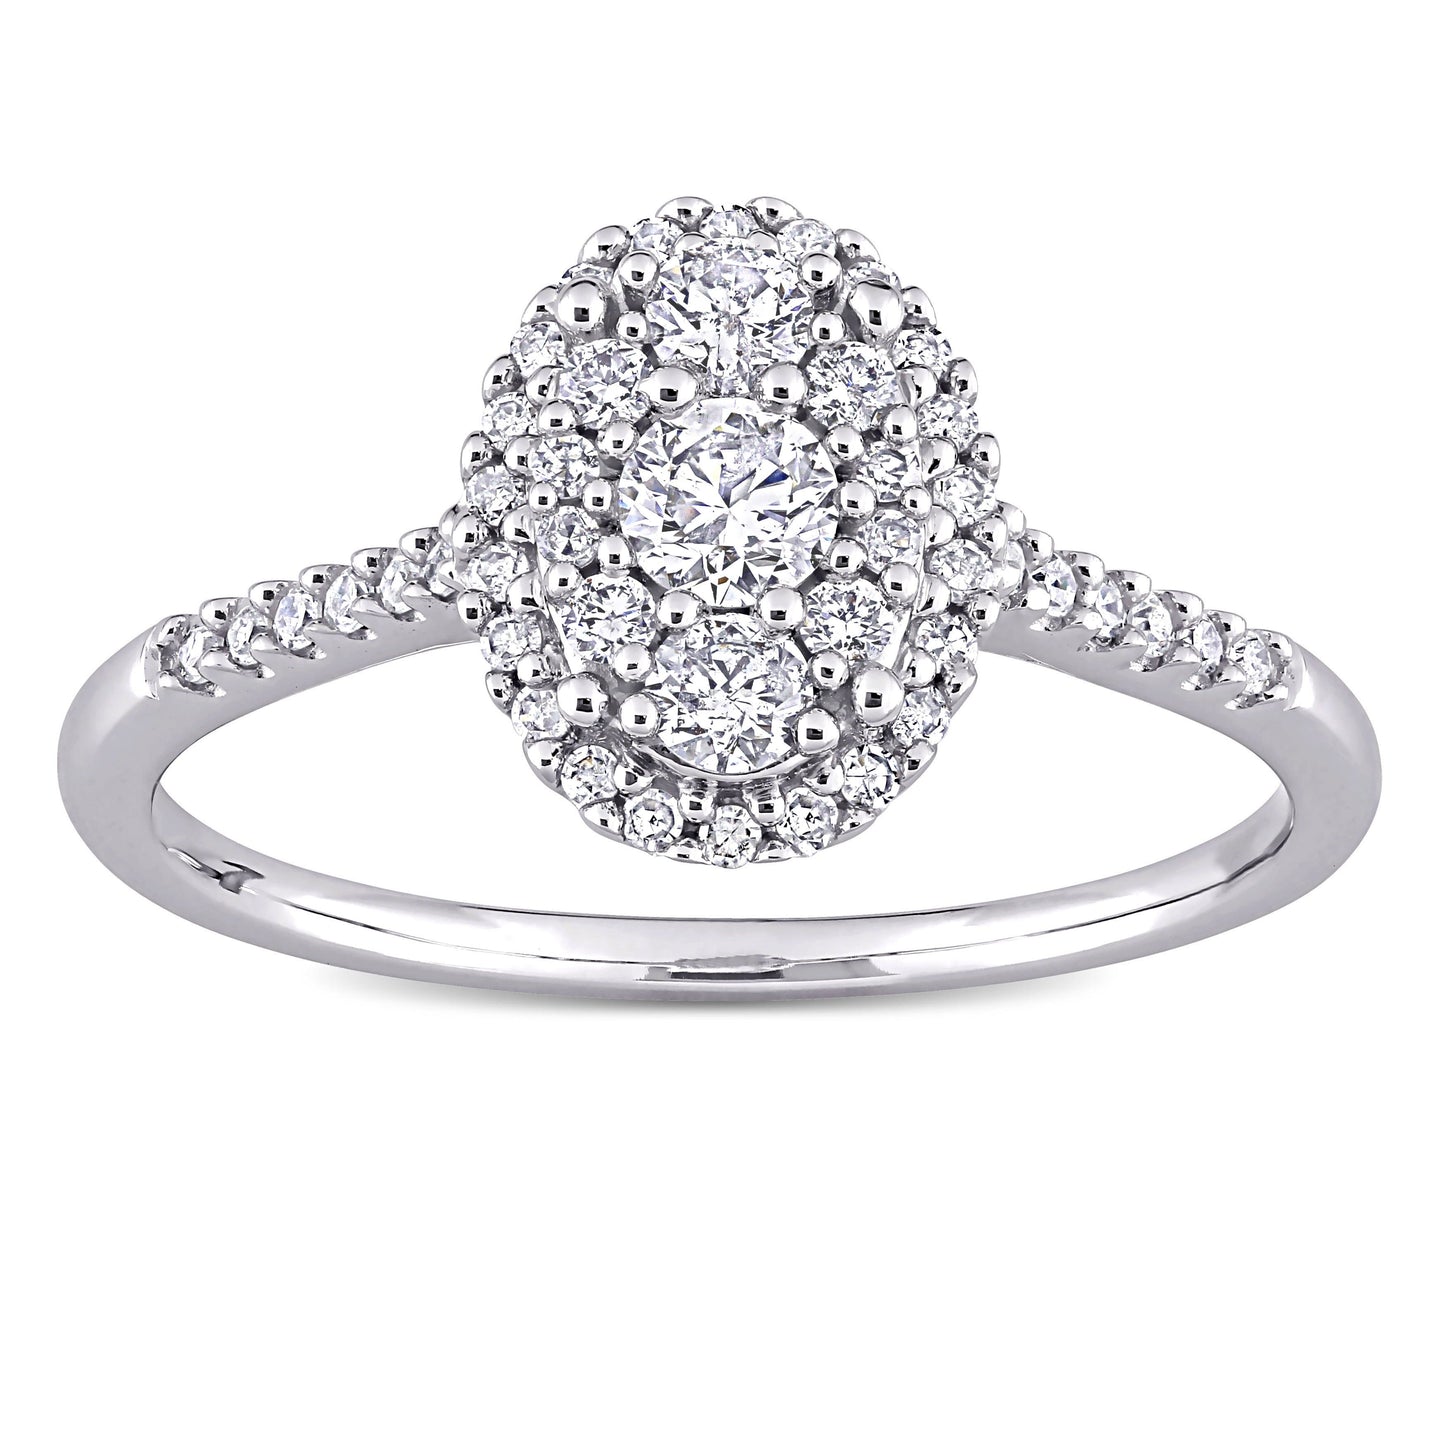 Oval Double Halo Diamond Ring in 10k White Gold